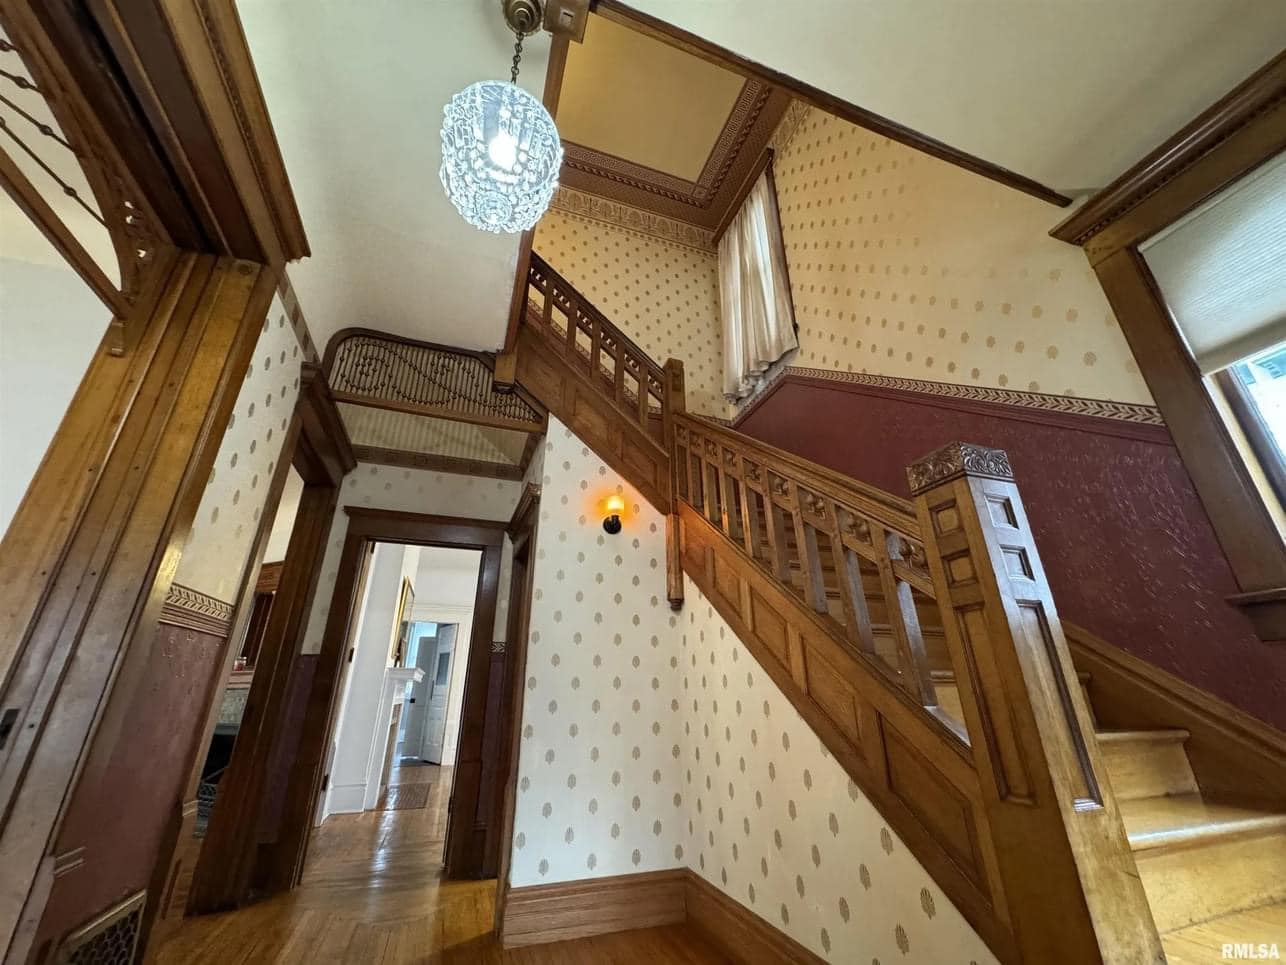 1894 Victorian For Sale In Galesburg Illinois